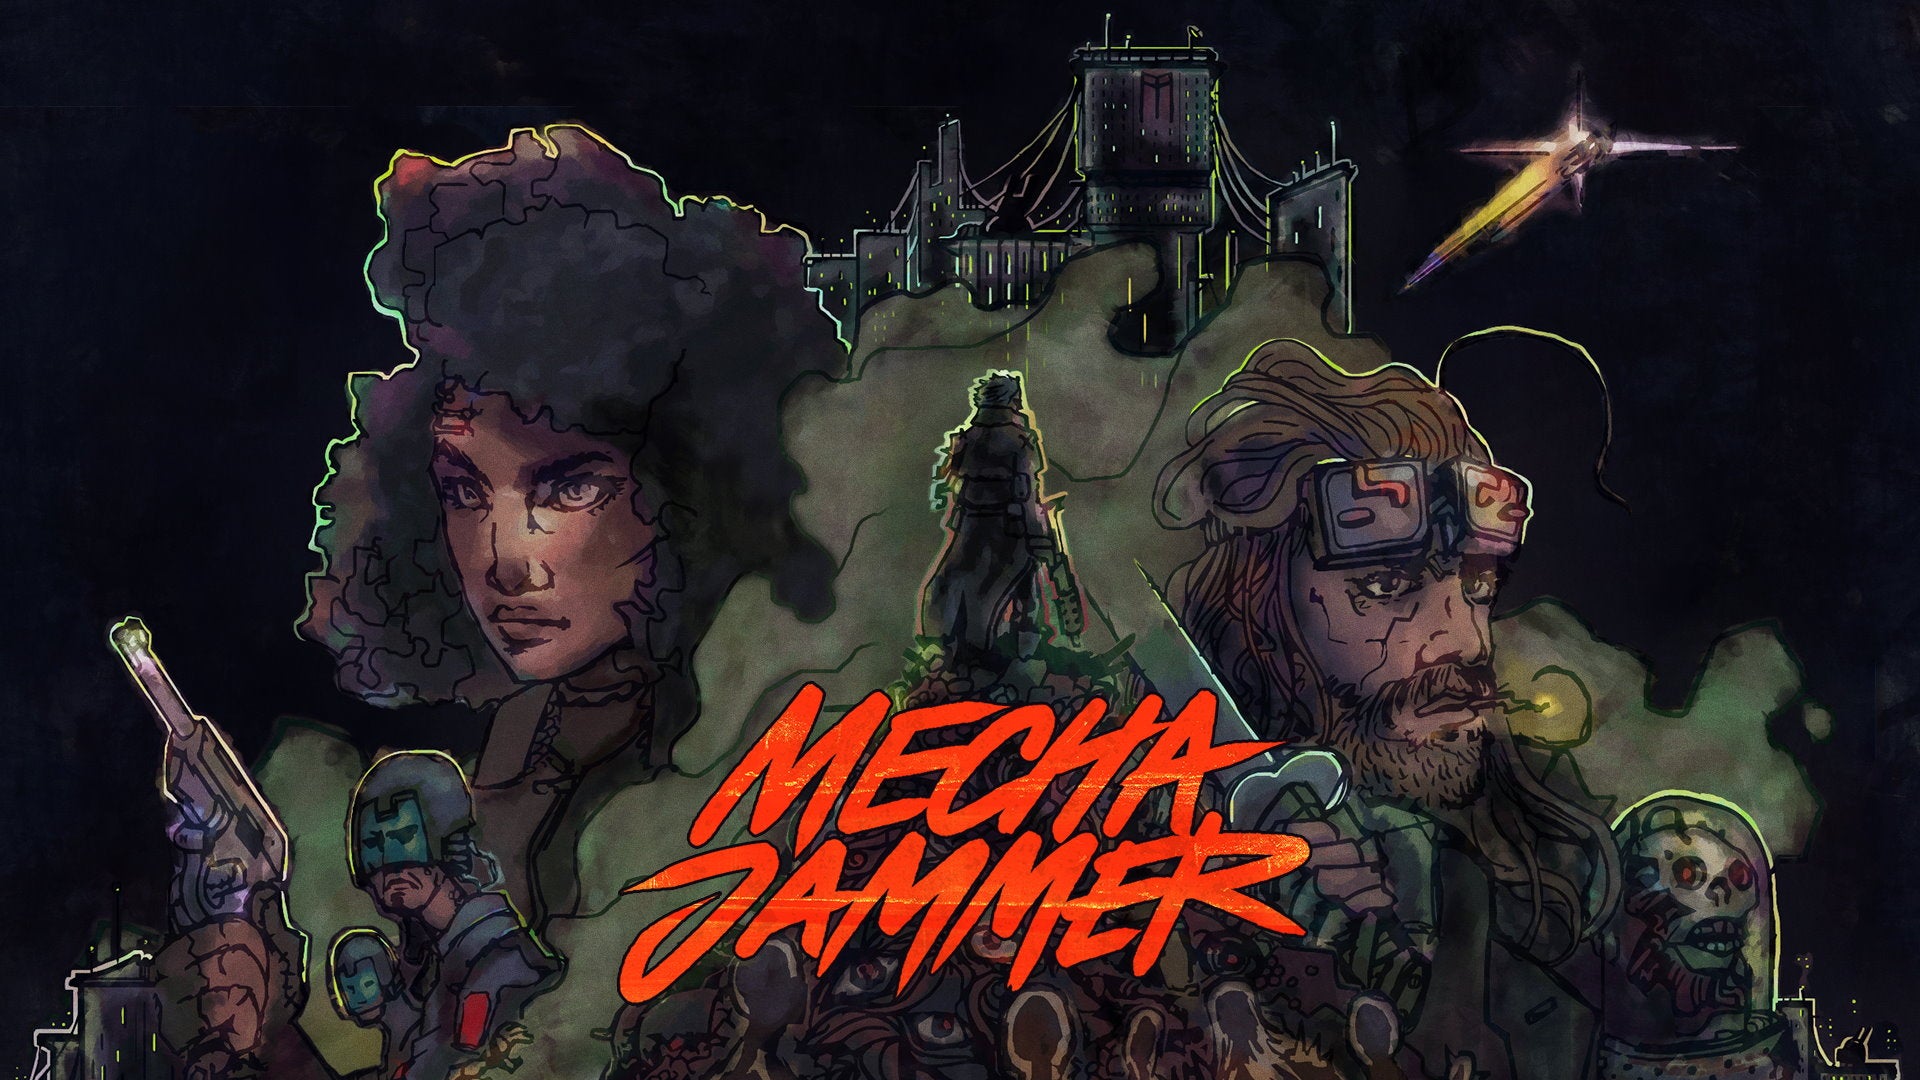 Artwork for Mechajammer, showing a woman and a goggled man in front of a dark cityscape